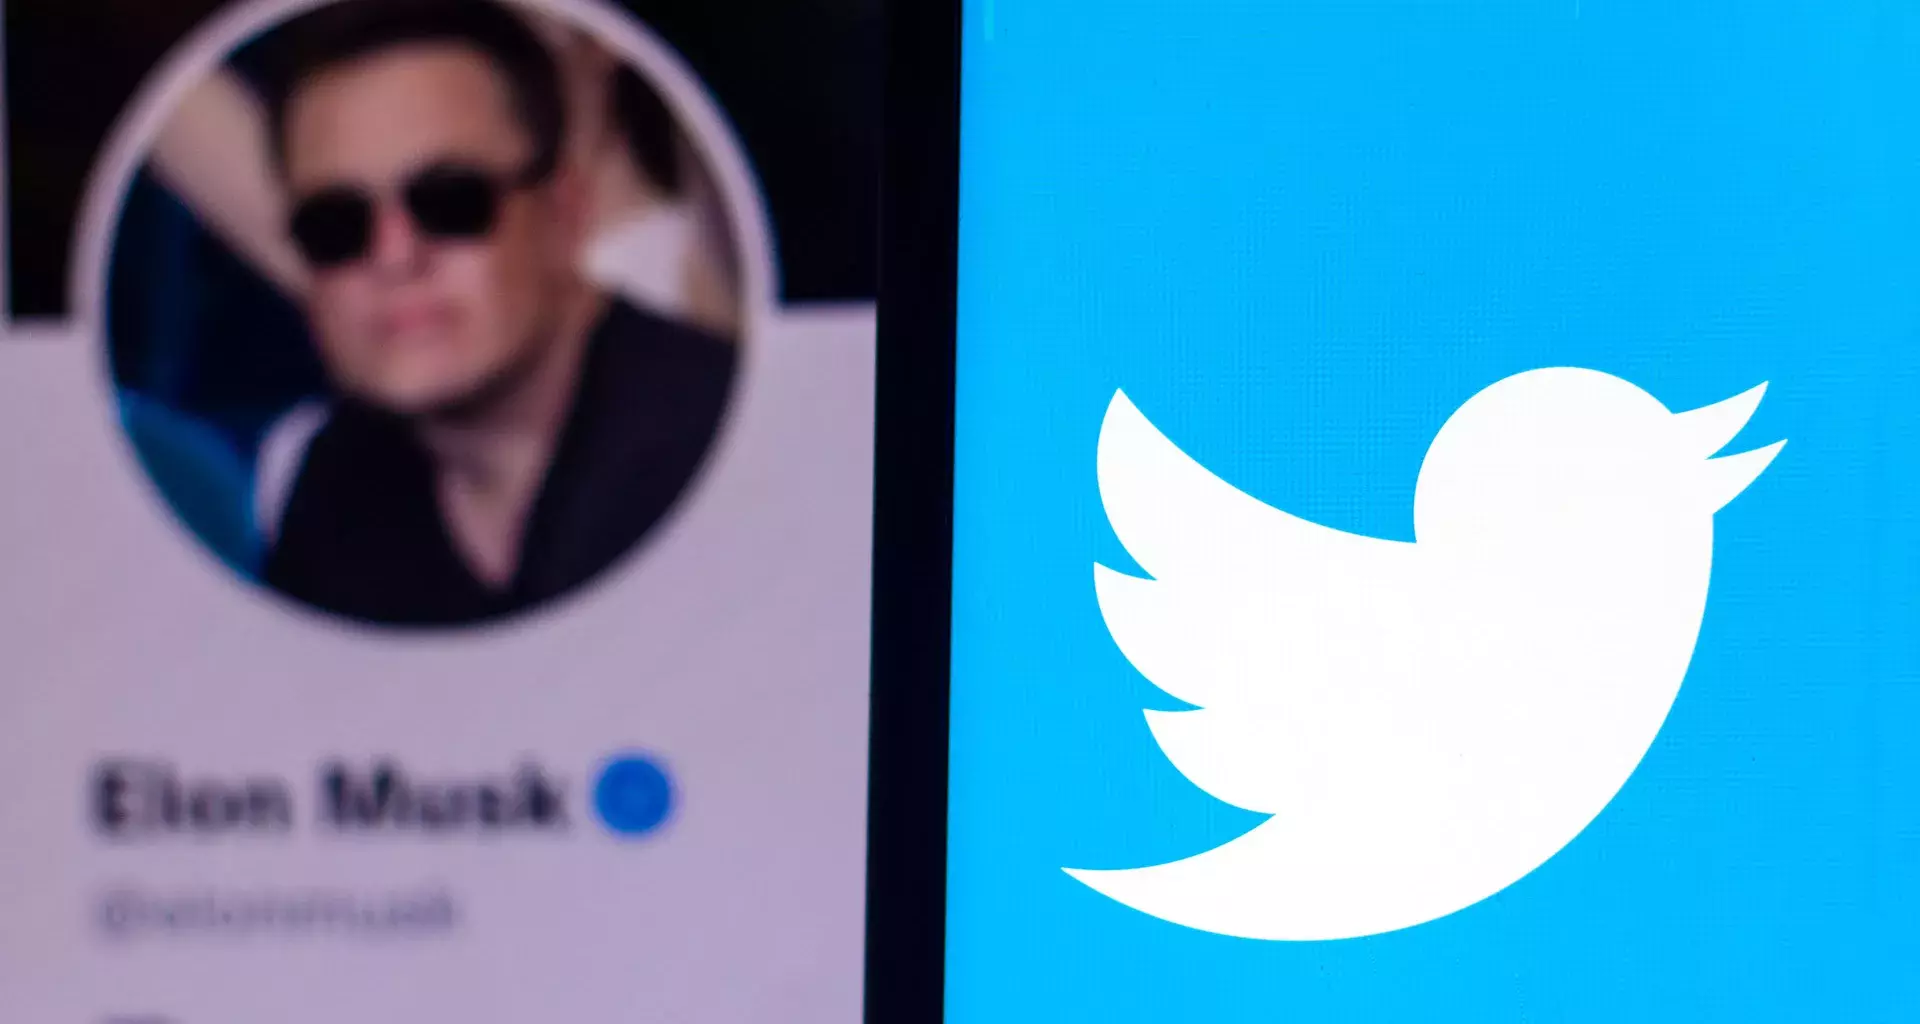 Will there be more freedom of expression on Twitter under Elon Musk?